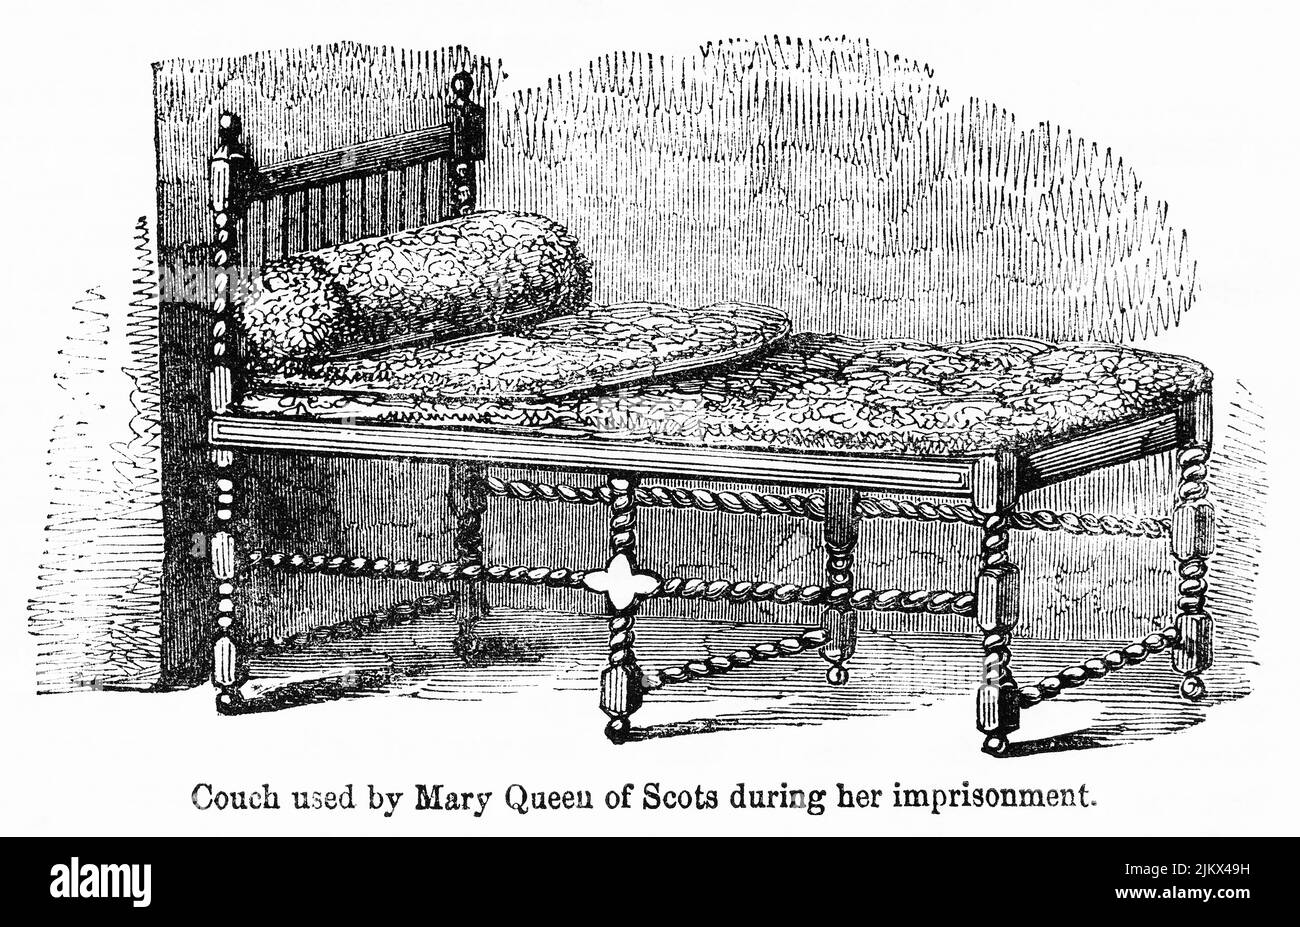 Couch used by Mary Queen of Scots during her imprisonment, Illustration from the Book, 'John Cassel’s Illustrated History of England, Volume II', text by William Howitt, Cassell, Petter, and Galpin, London, 1858 Stock Photo